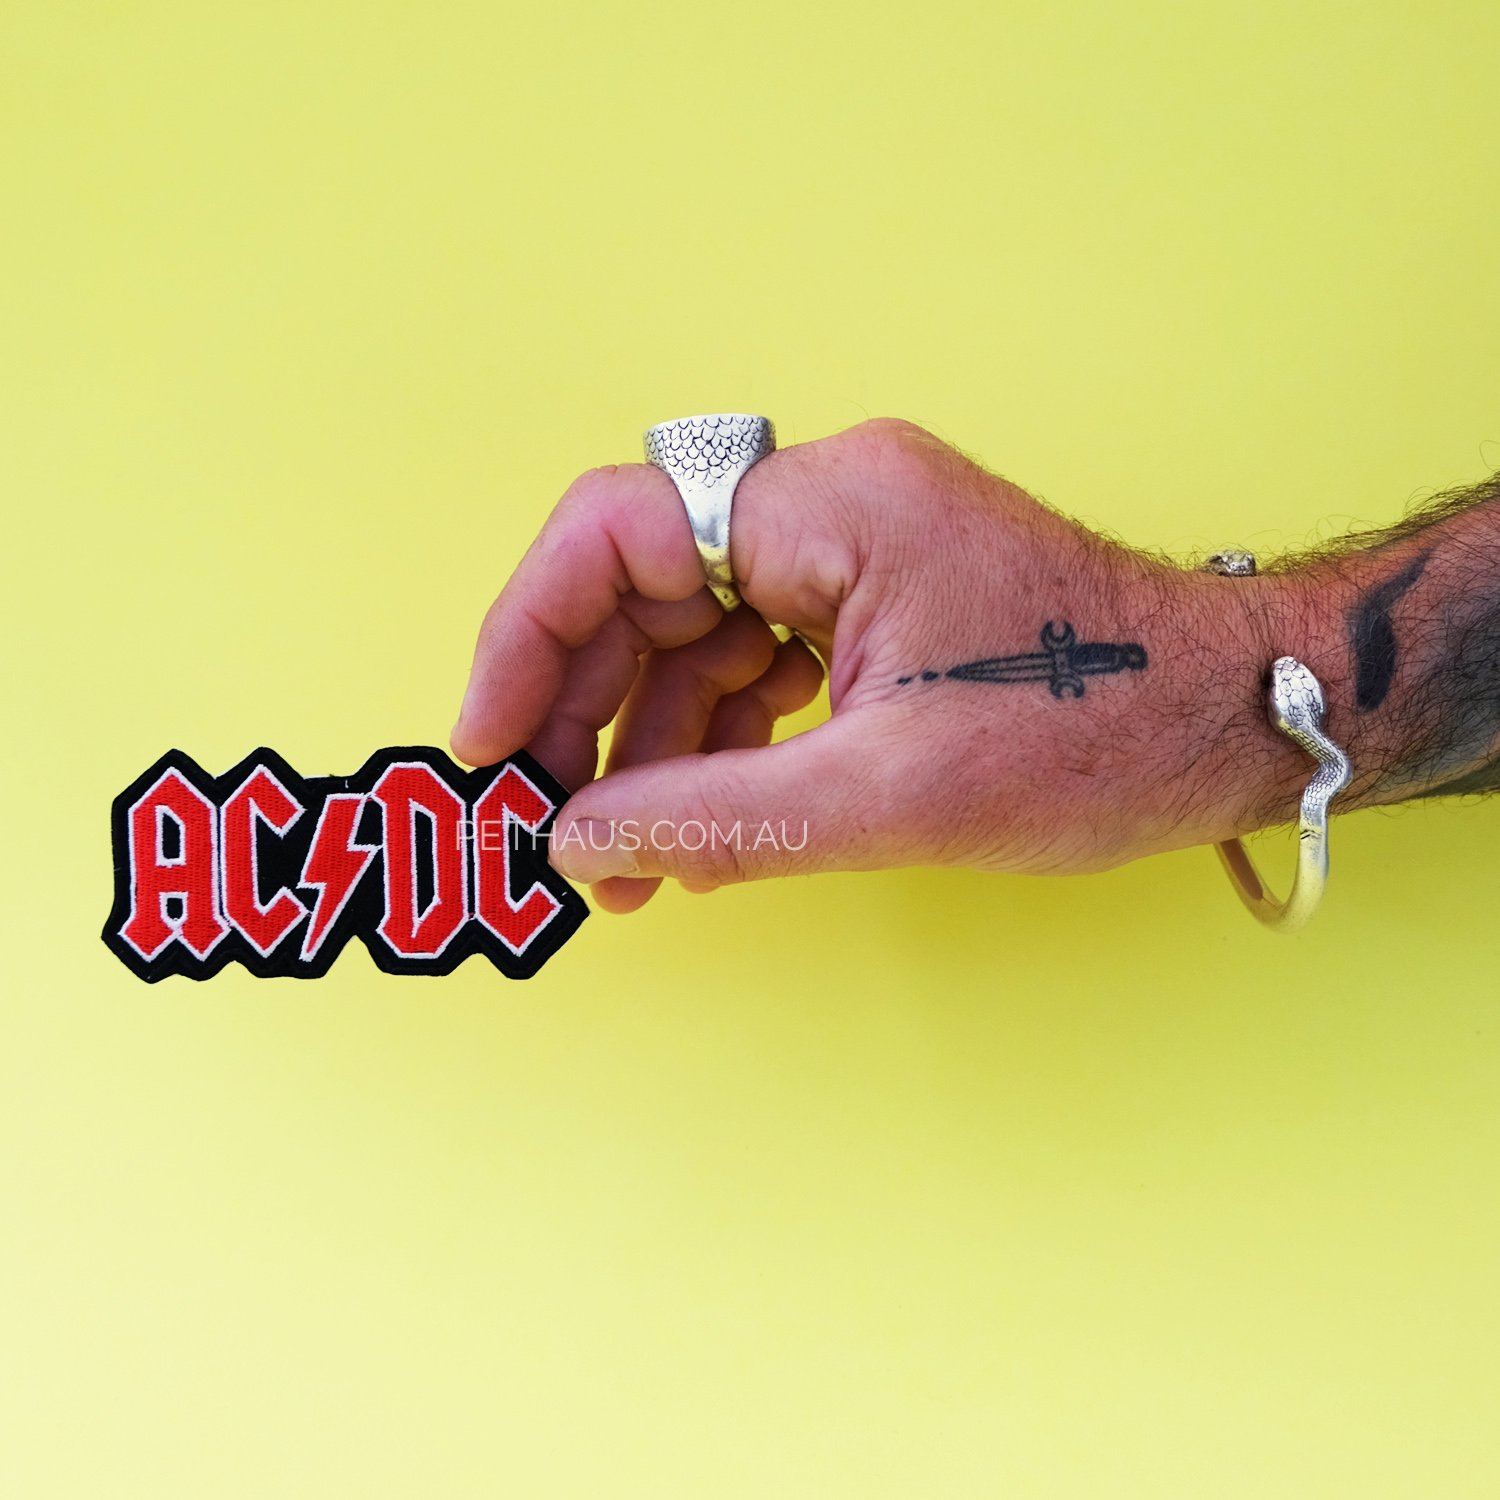 ACDC patch, band patch, rock patch